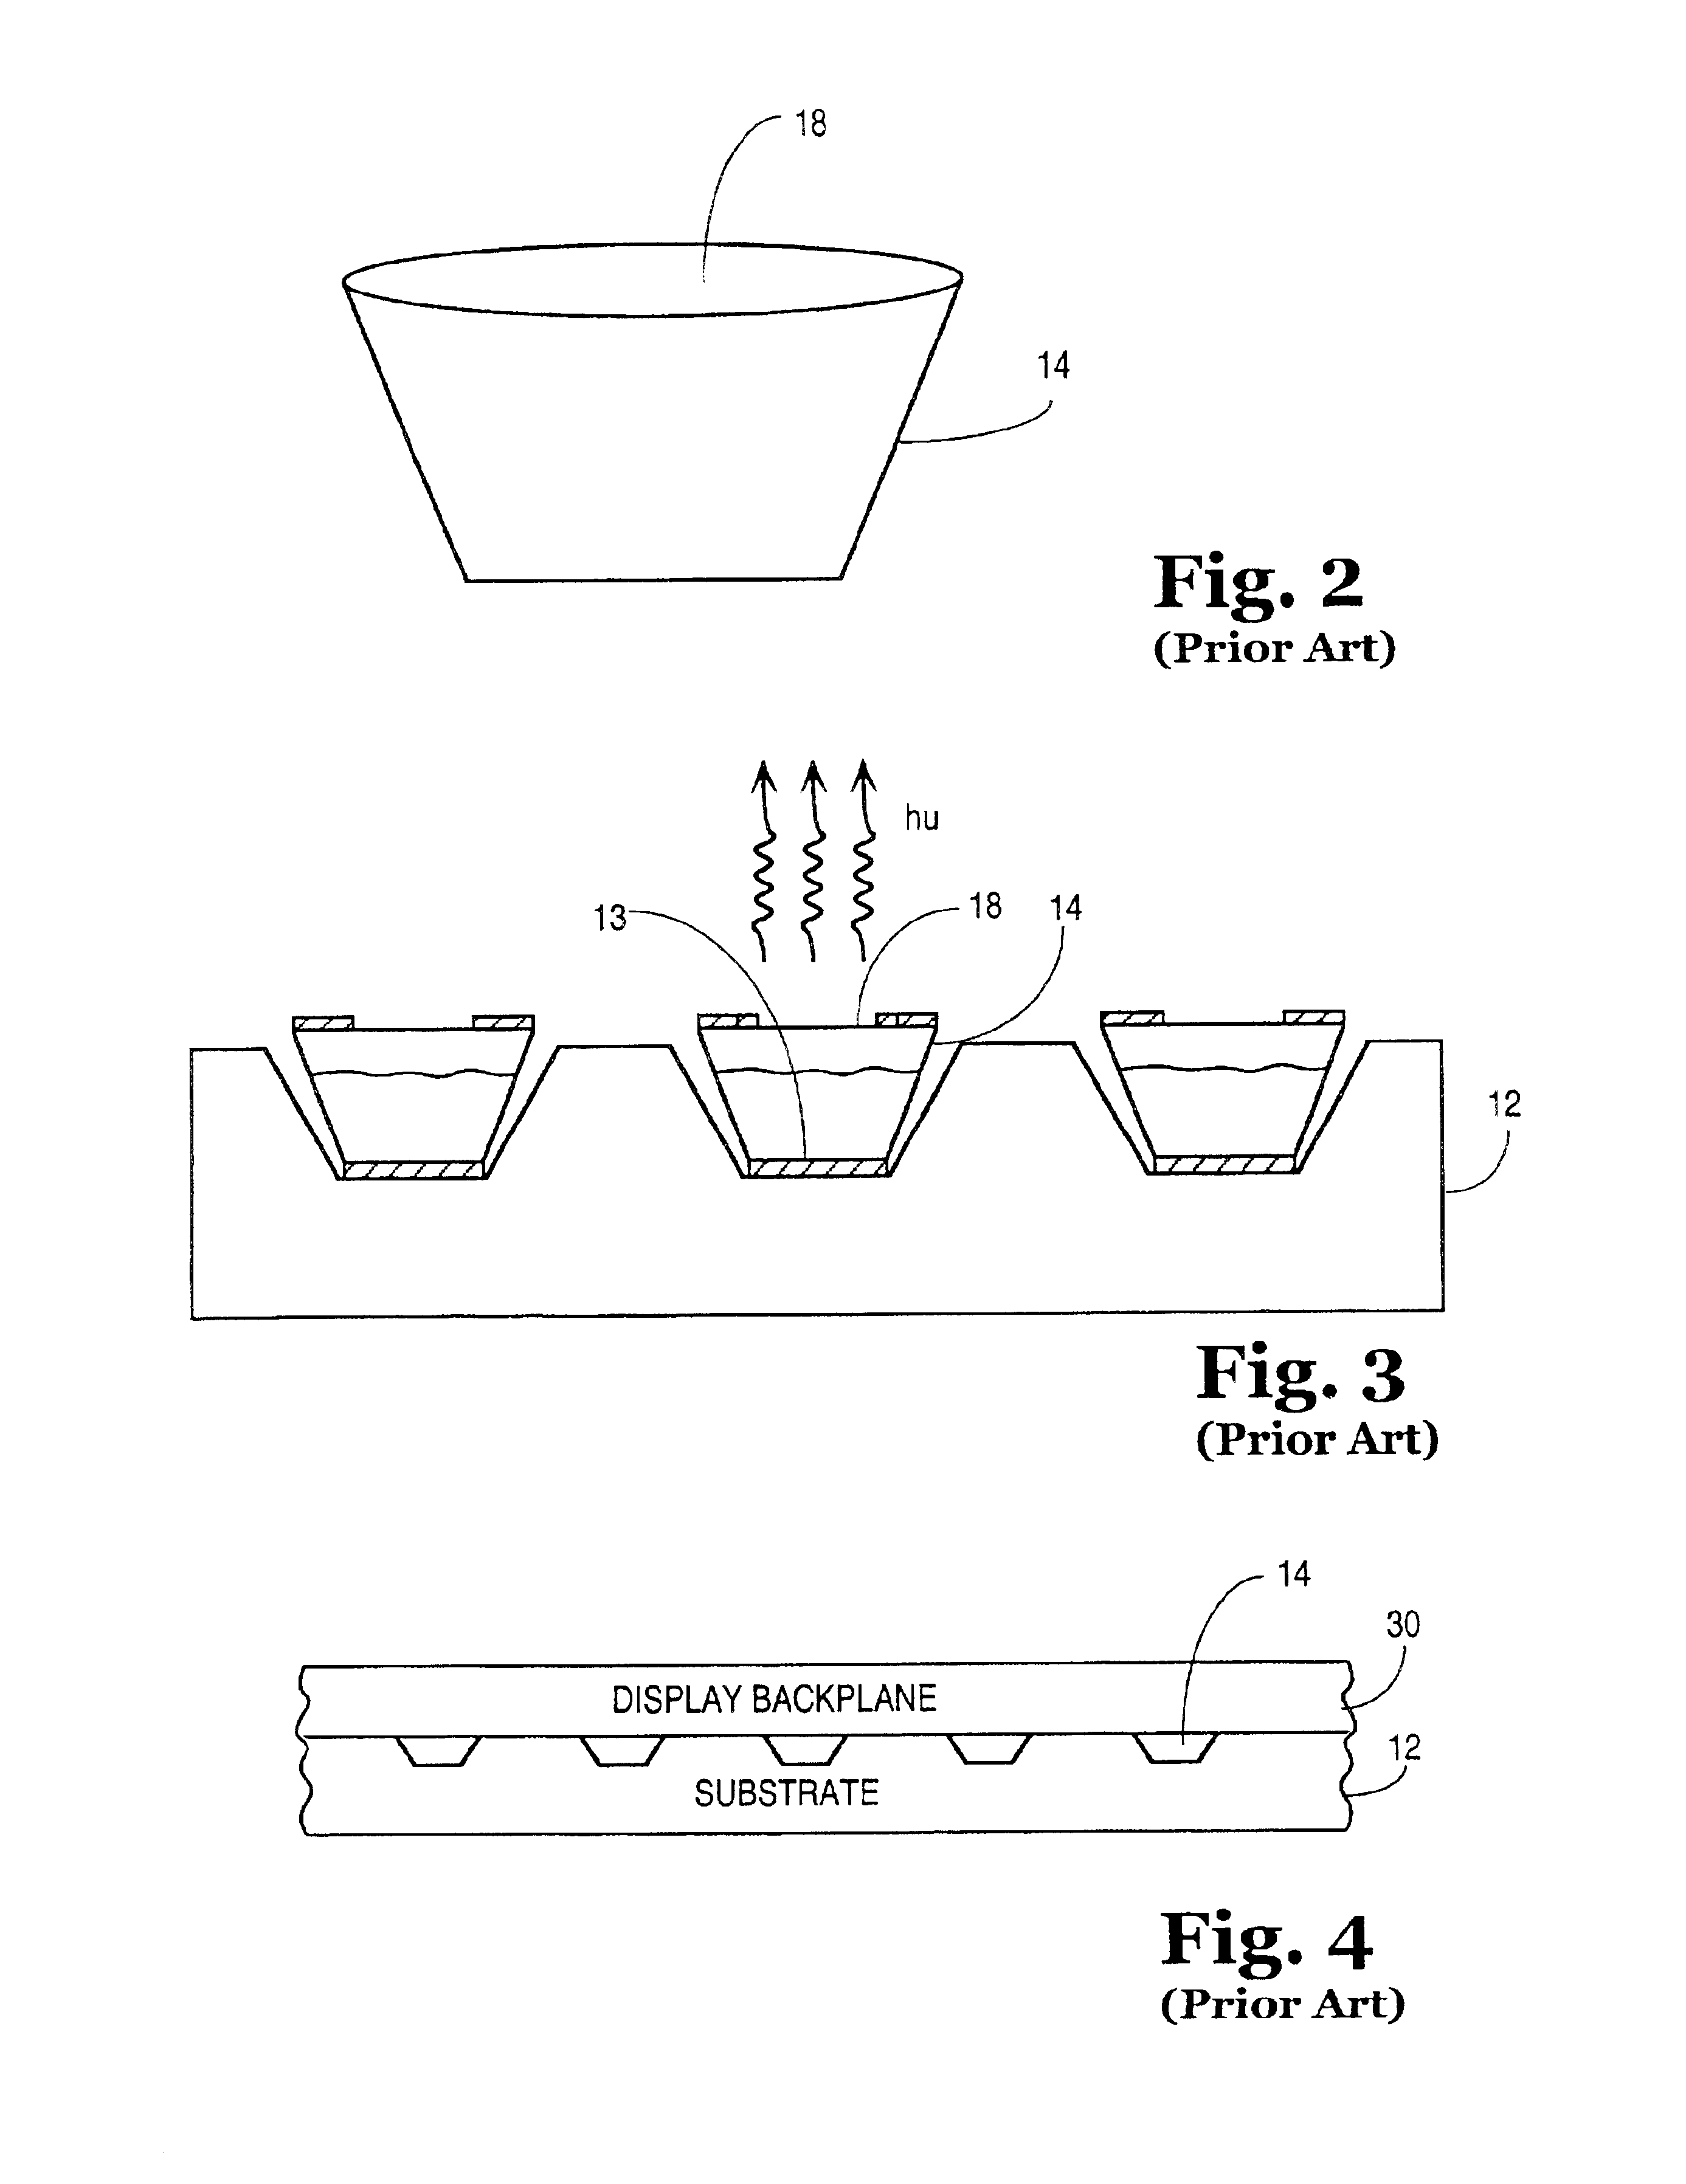 Apparatuses and methods for forming electronic assemblies